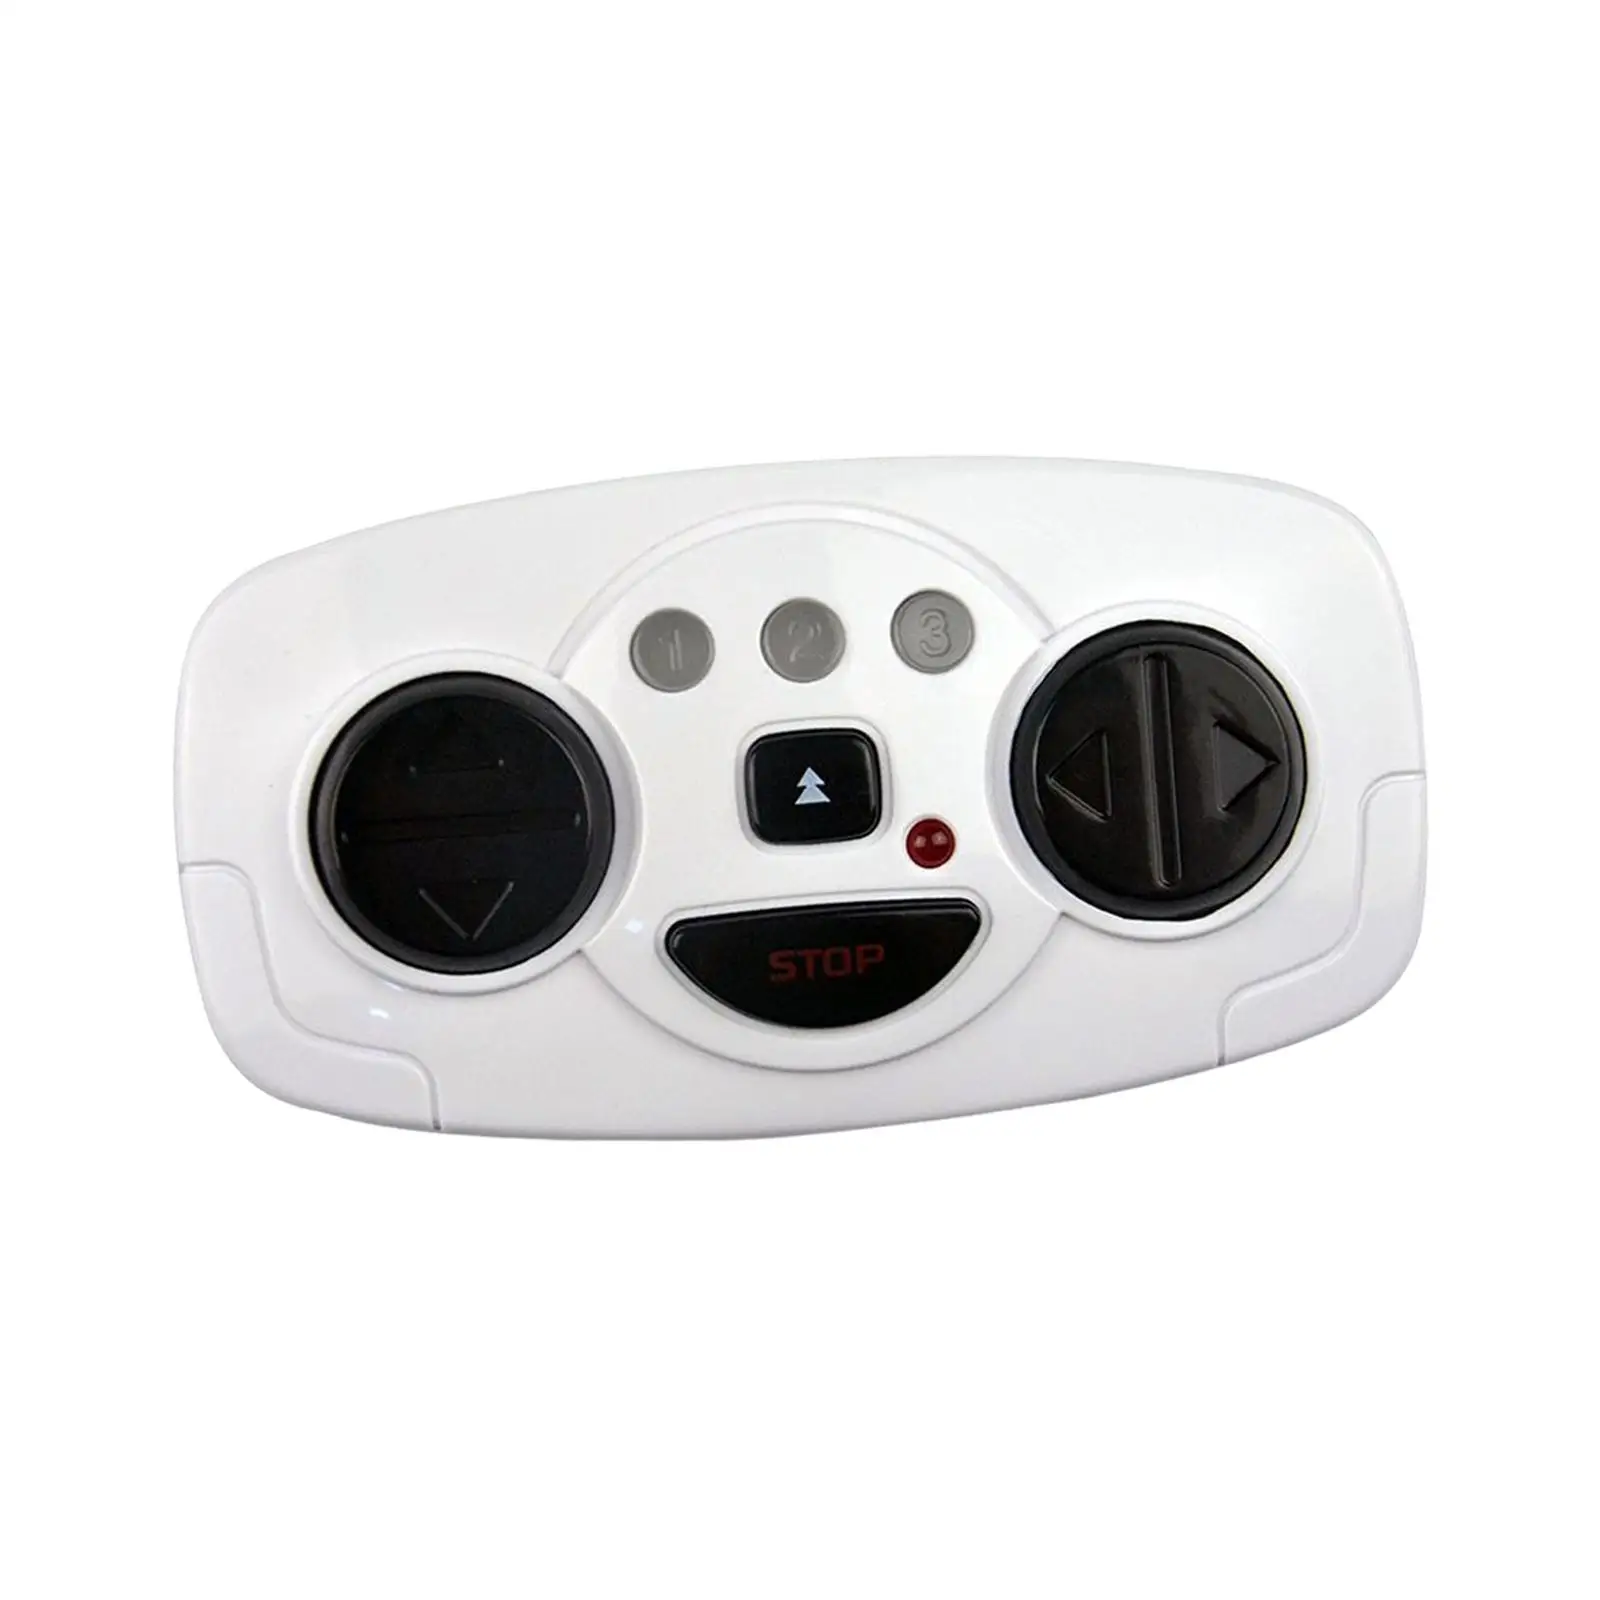 Remote Controller Durable Accessories Parts Fitments for Kids RC Model Cars